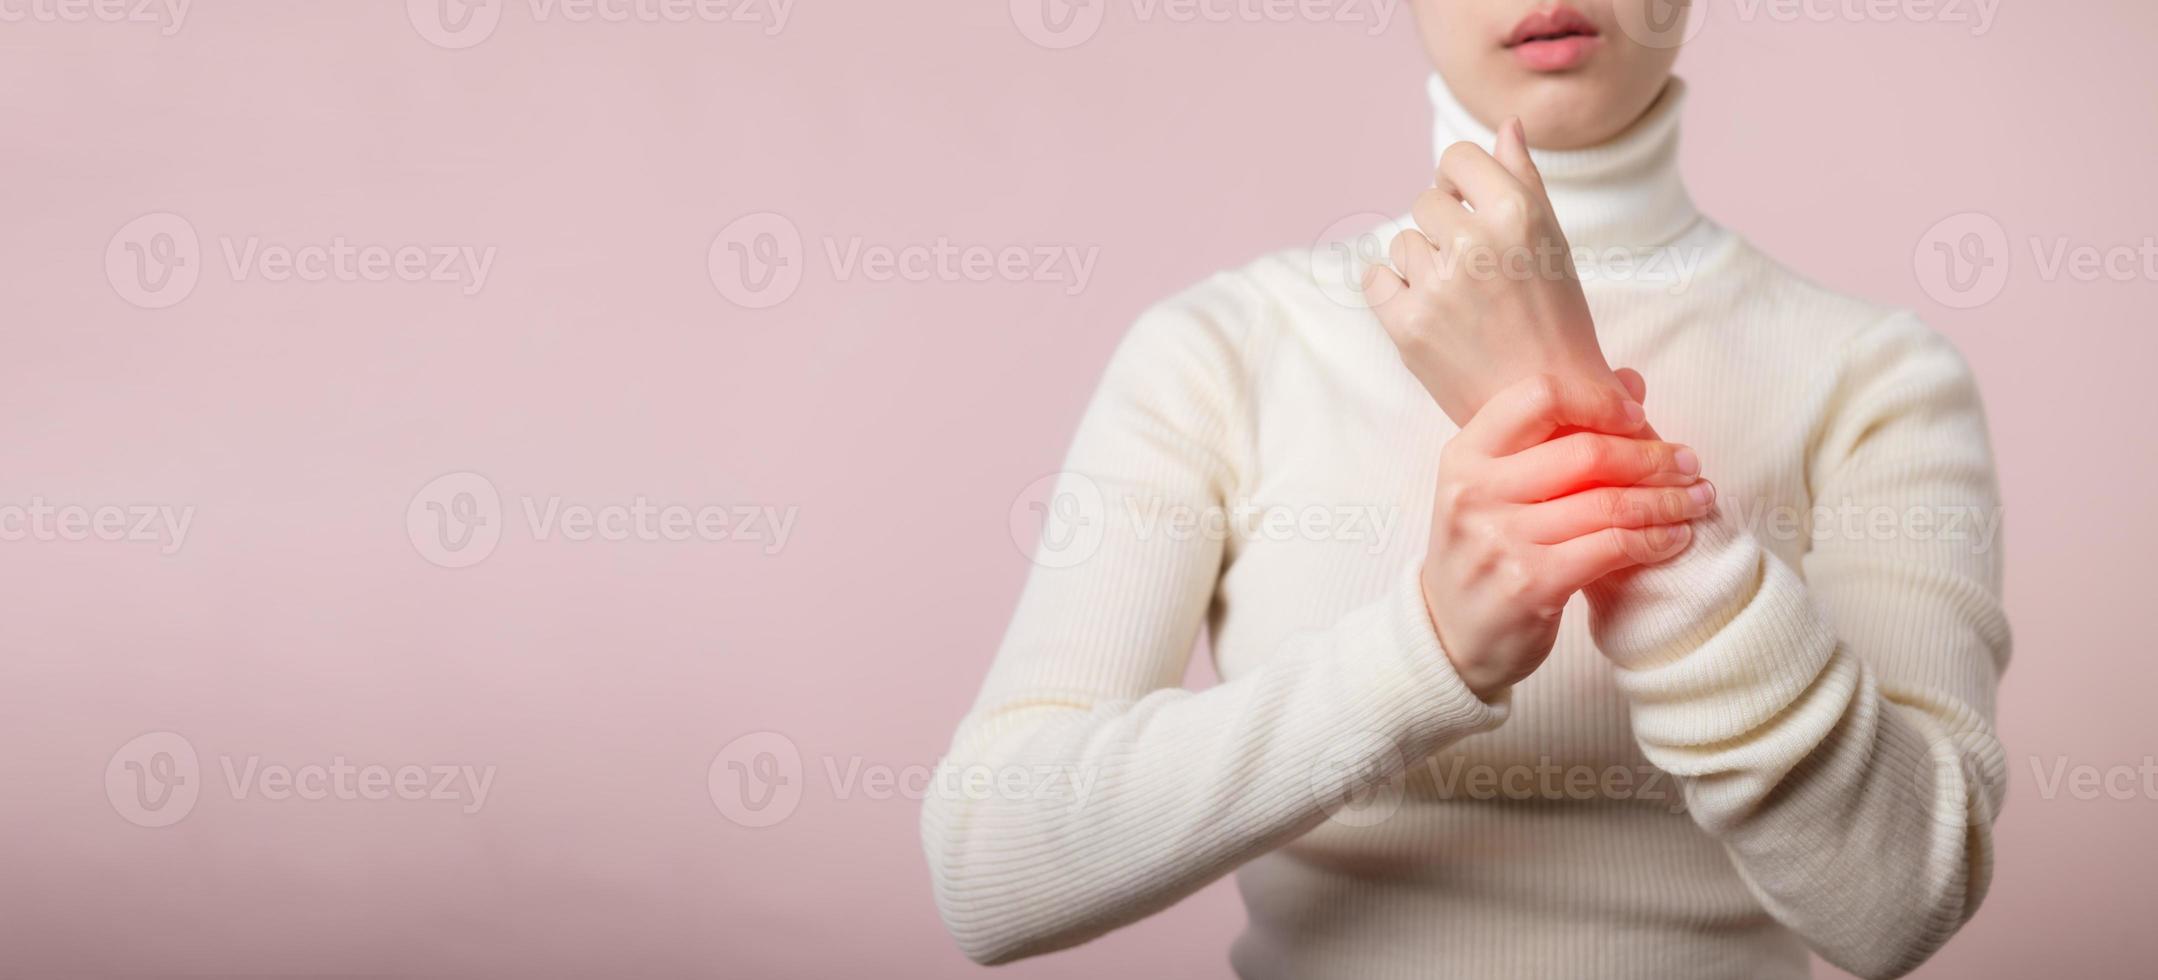 Young asian woman with white sweater cloth suffering from wrist hand pain injury. Causes of hurt include carpal tunnel syndrome, fractures, arthritis or trigger finger. world health day concept. photo